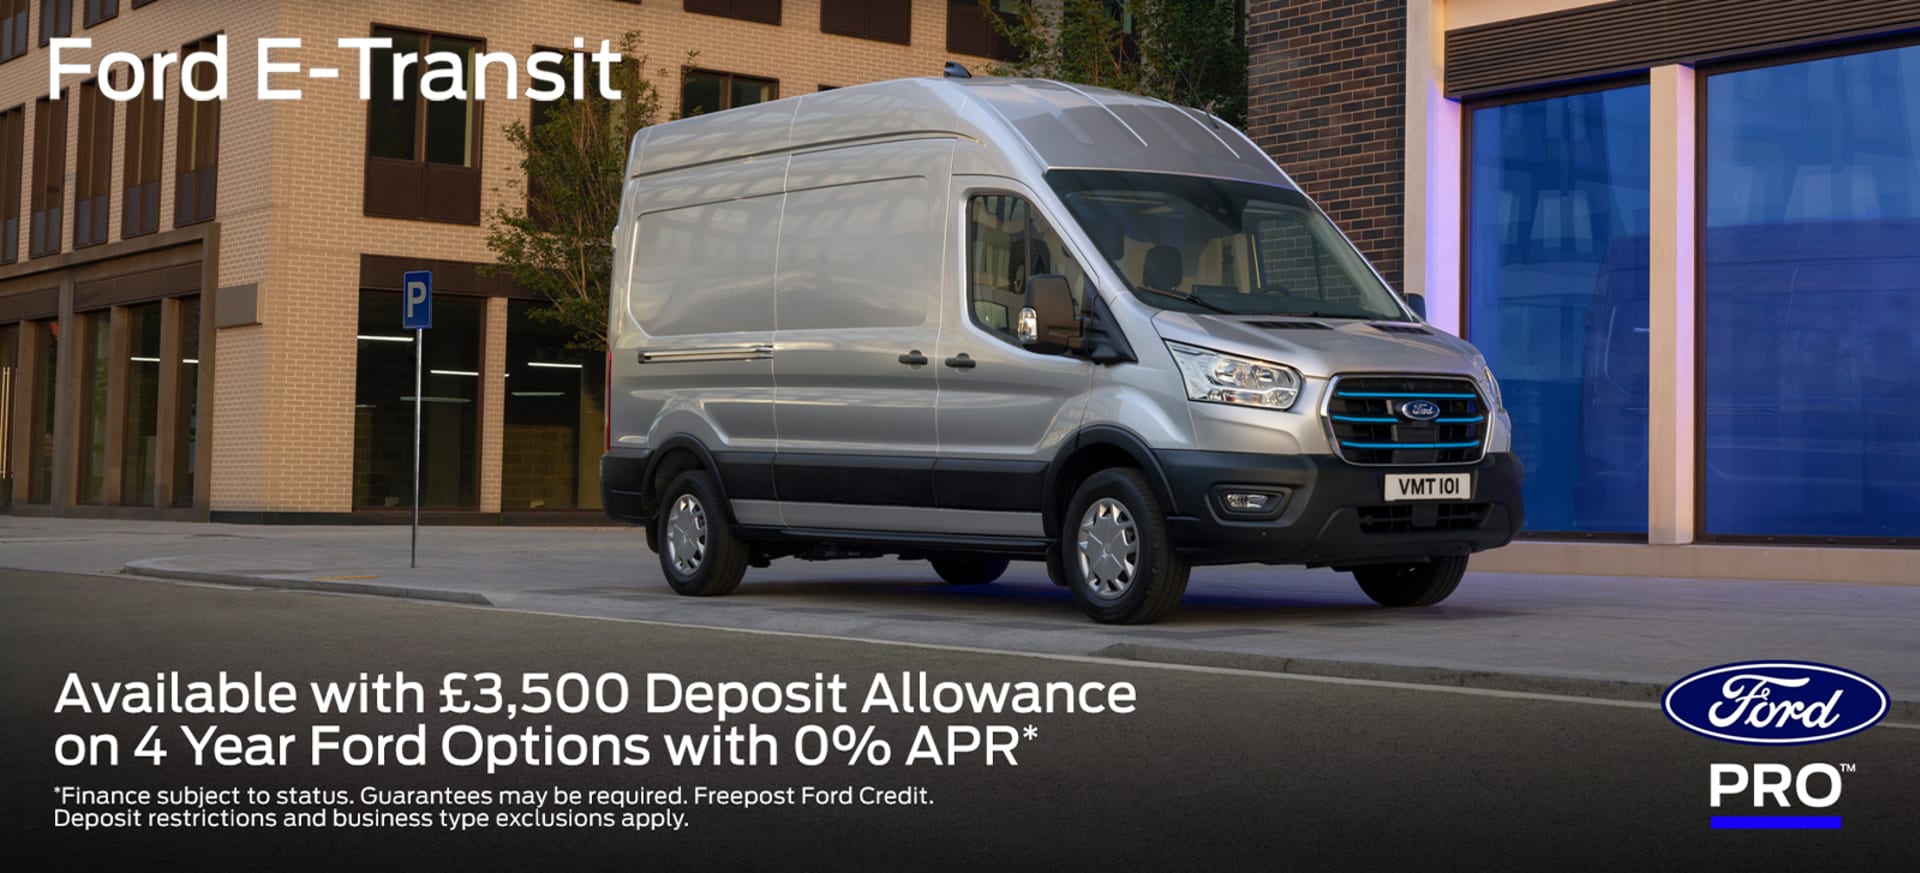 Ford E-Transit Homepage Banner